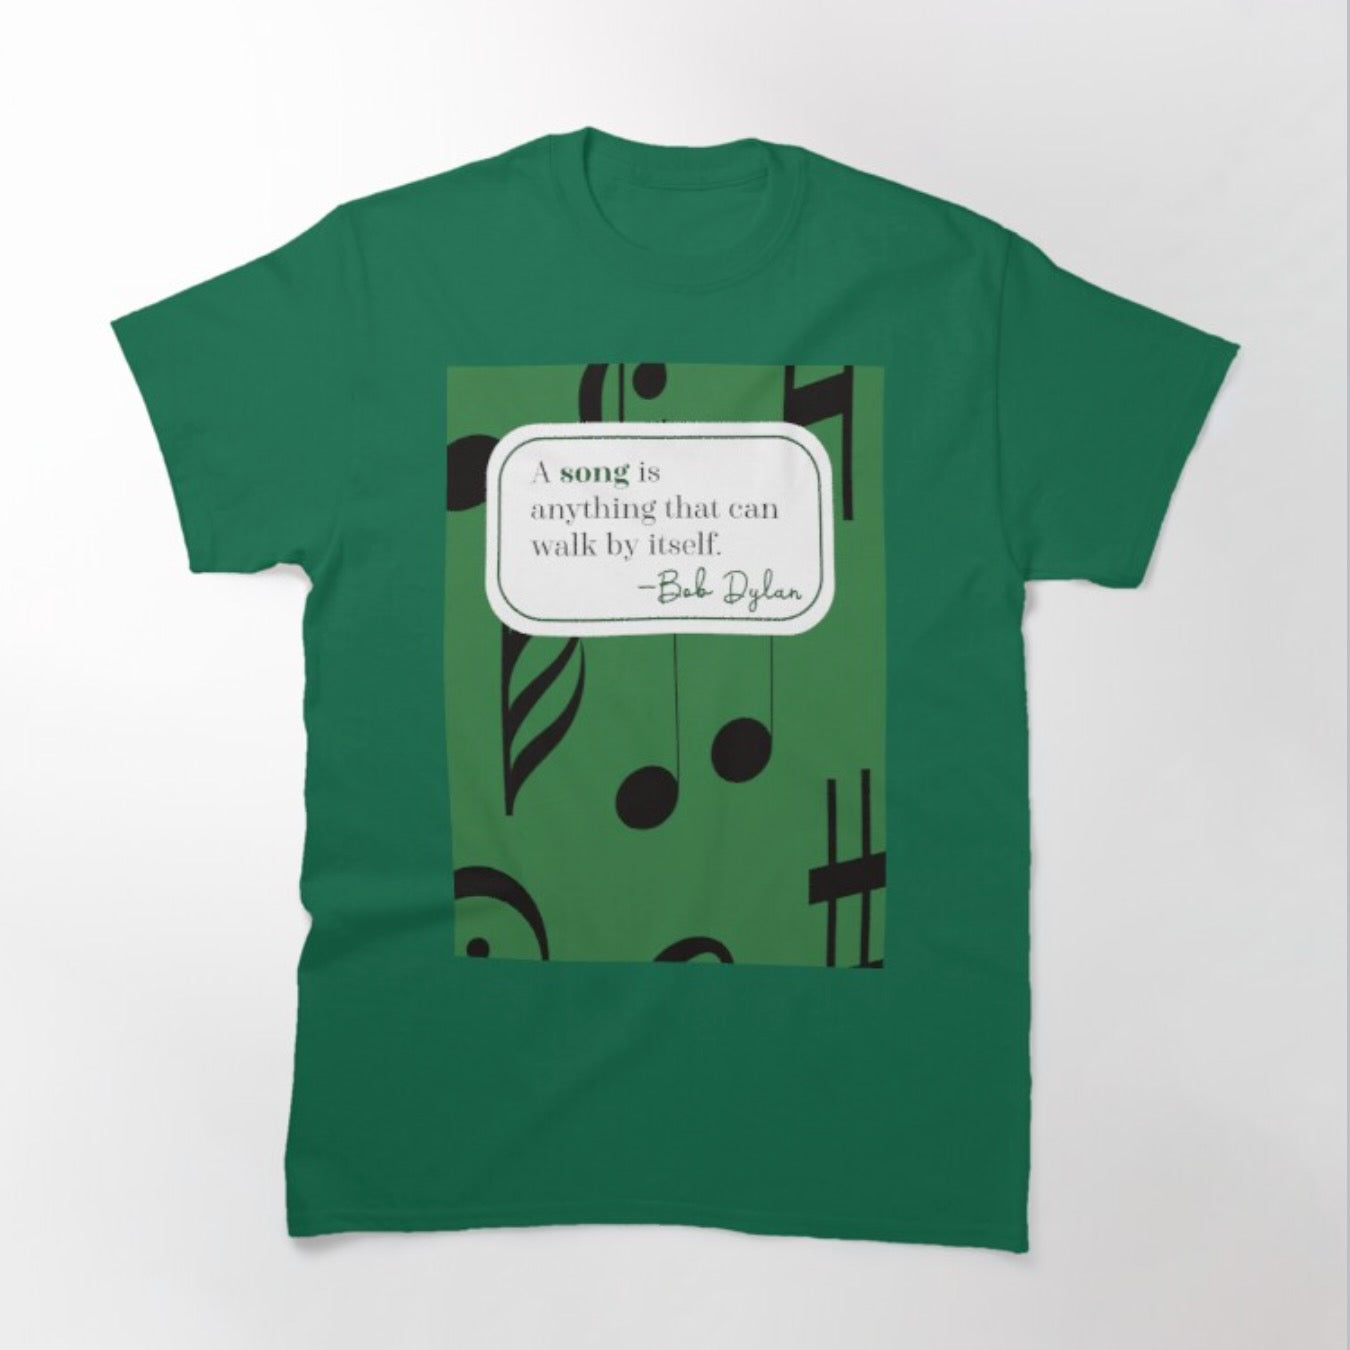 'Musically Quotes' classic T-shirt for biggies